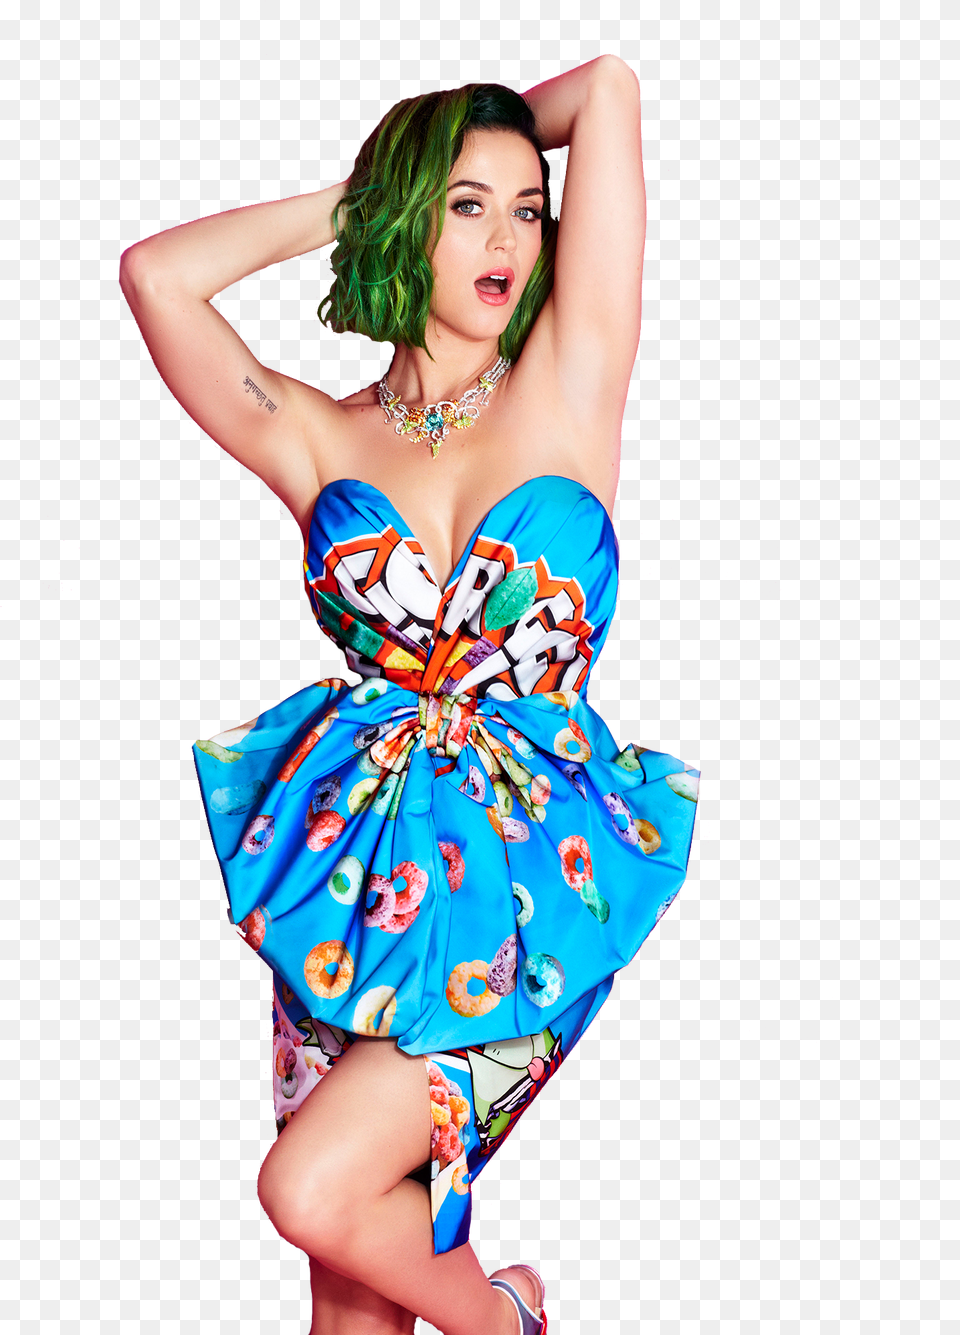 Download Katy Perry Hd Katy Perry Cosmopolitan, Woman, Fashion, Formal Wear, Evening Dress Png Image